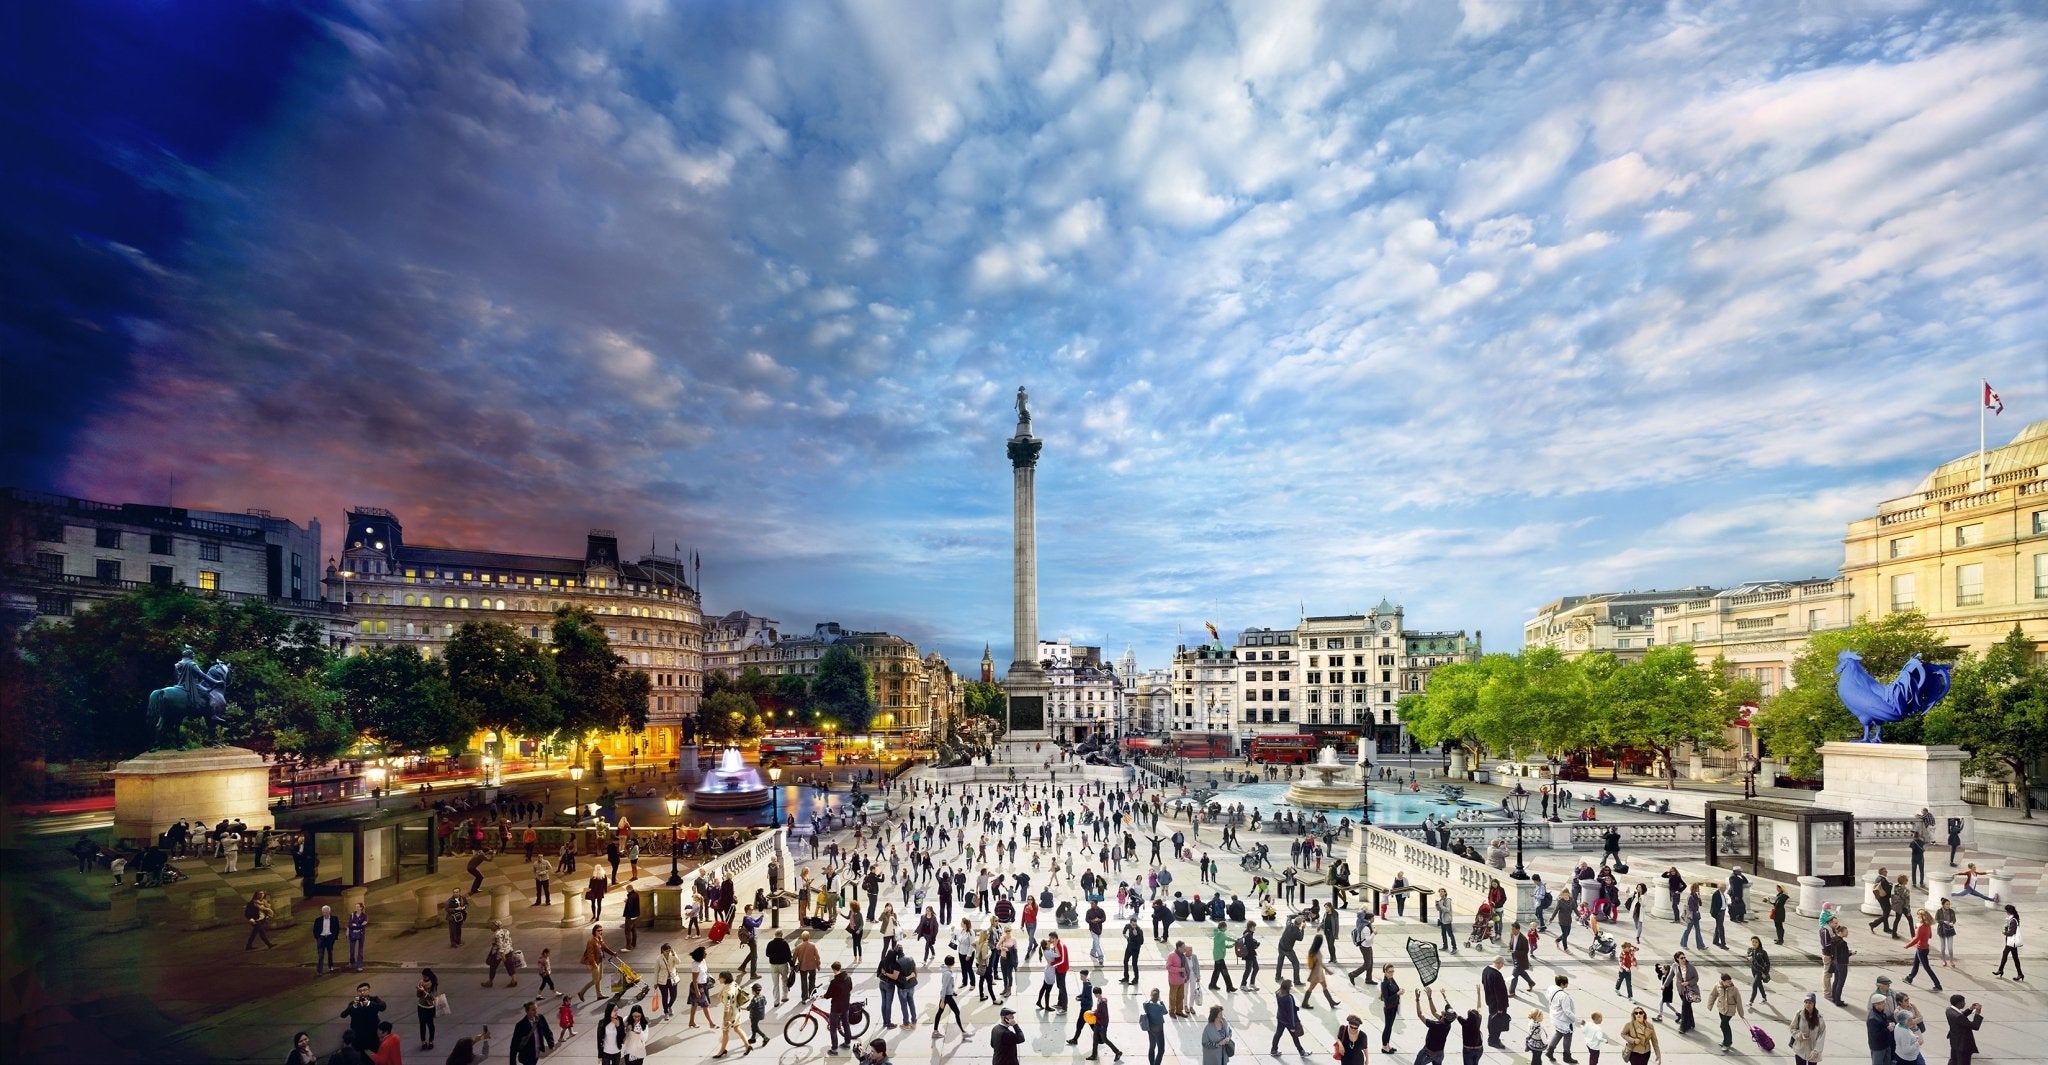 Stephen Wilkes Trafalger Square London Day To Night 4d Puzzle